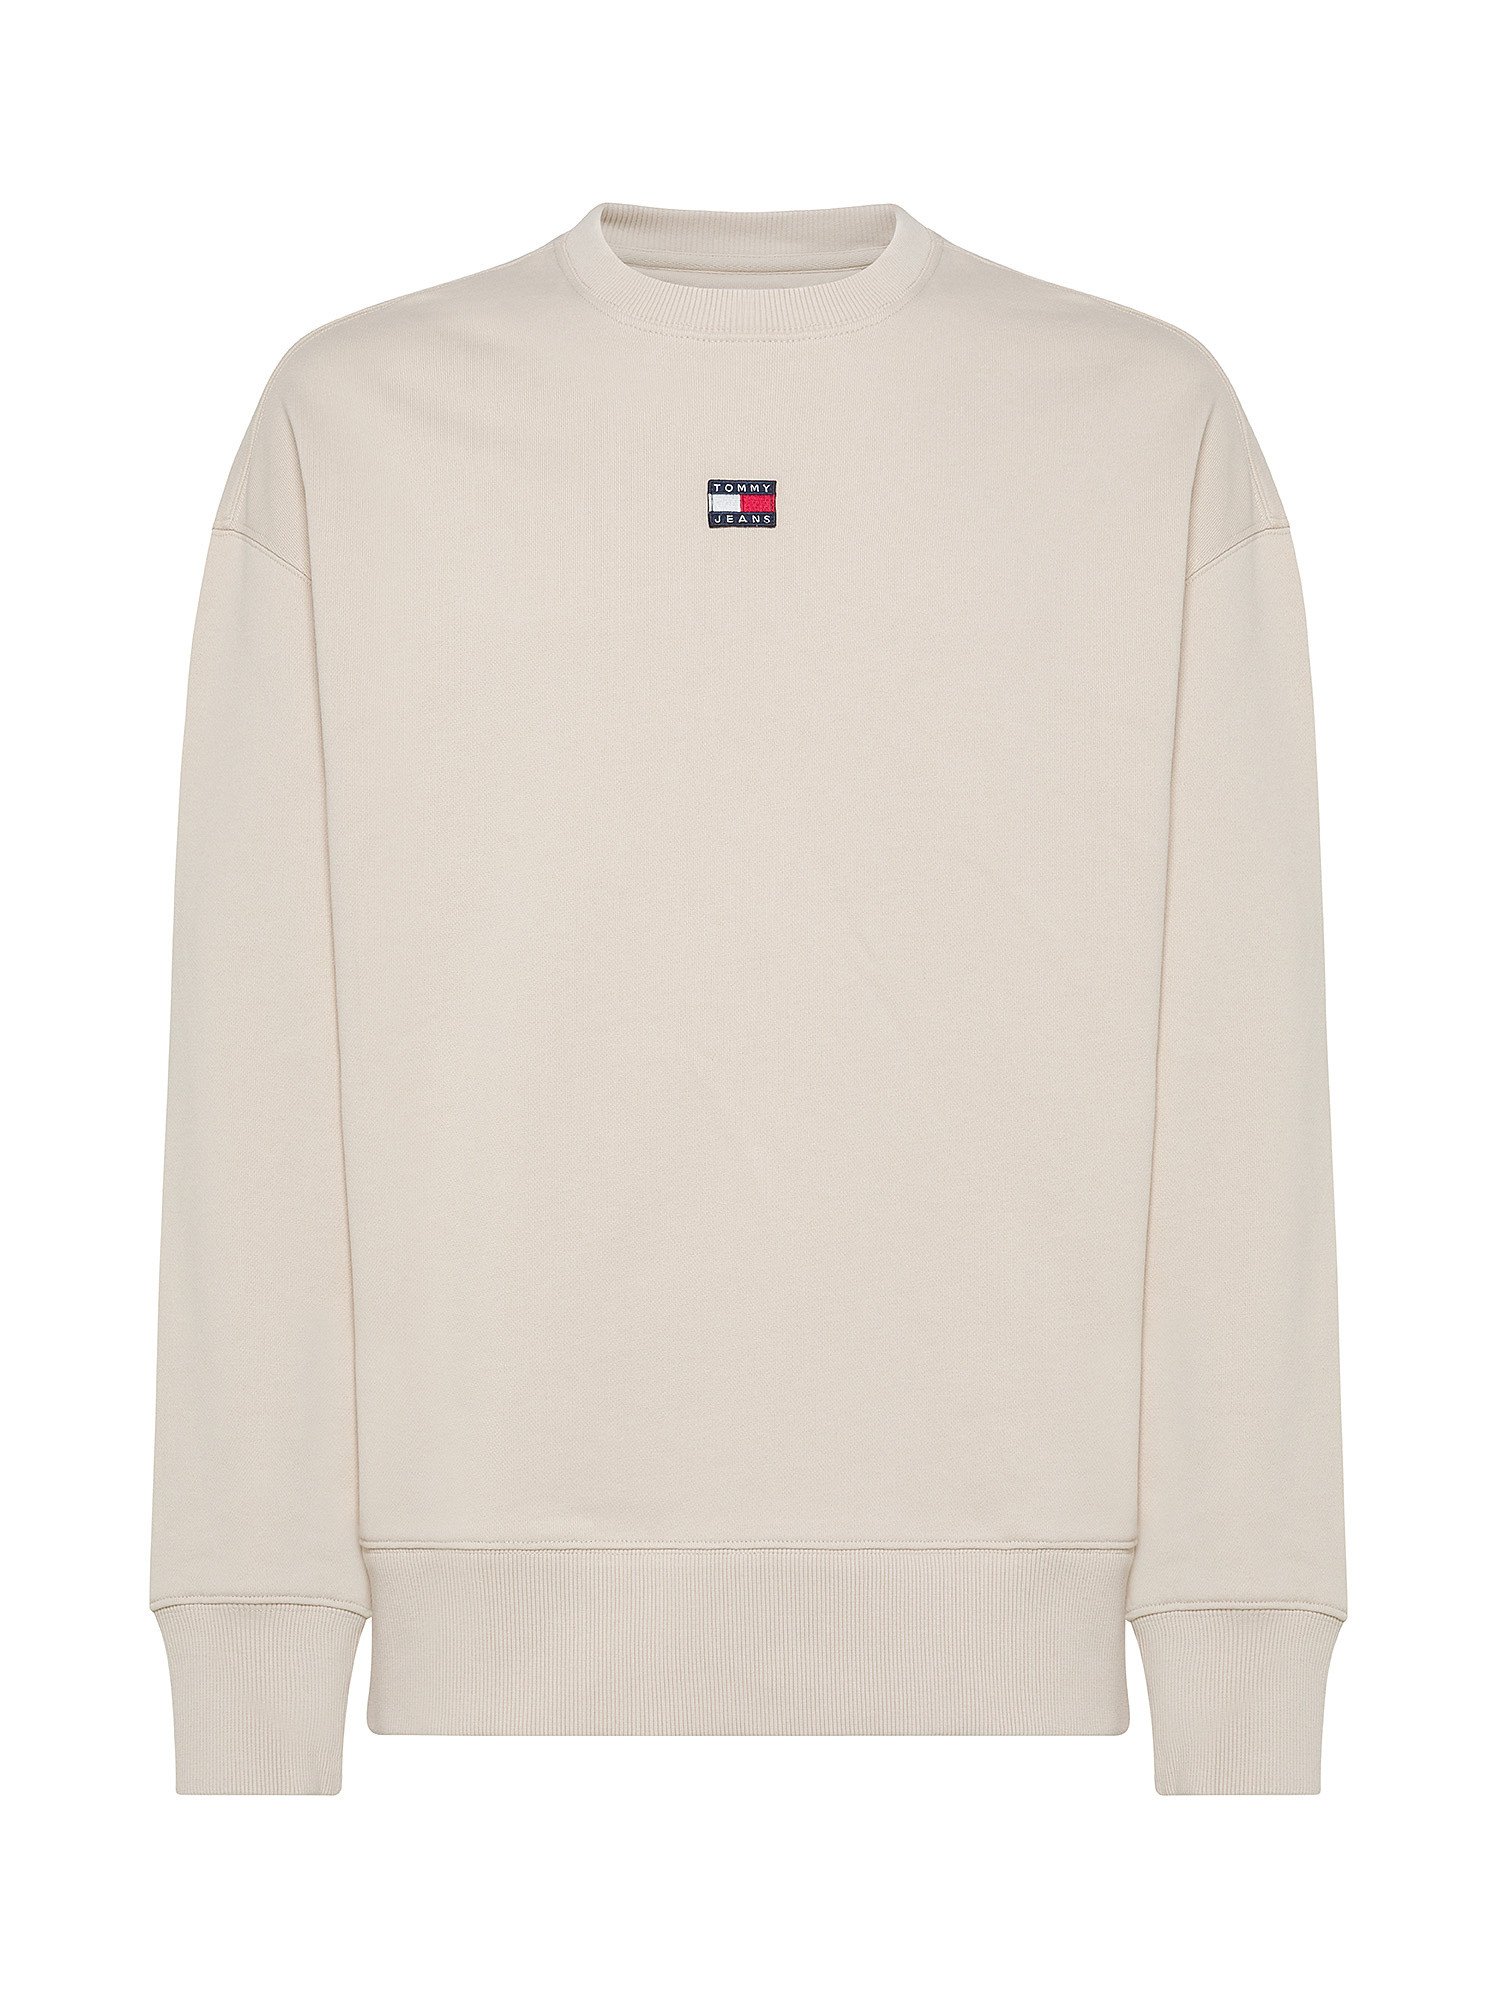 Tommy Jeans - Felpa relaxed fit in cotone con logo, Bianco avorio, large image number 0